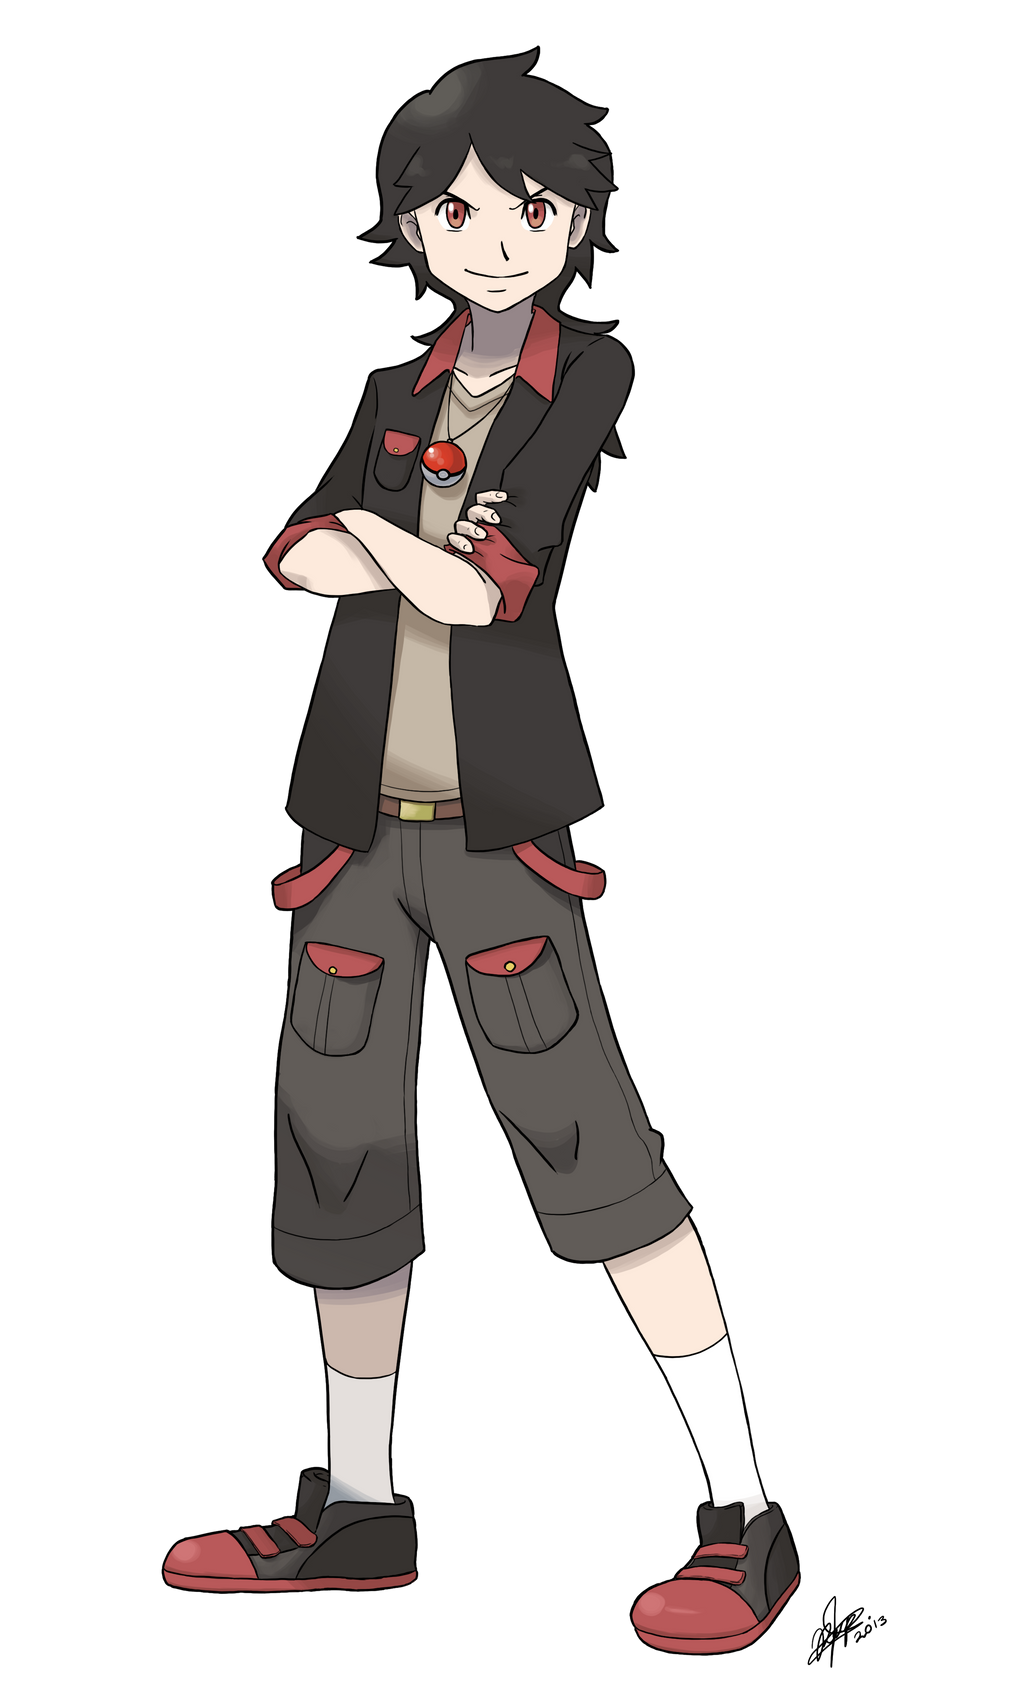 __male_pkmn_trainer___commission_for_scattystorm___by_kysel-d5yaa2c.png